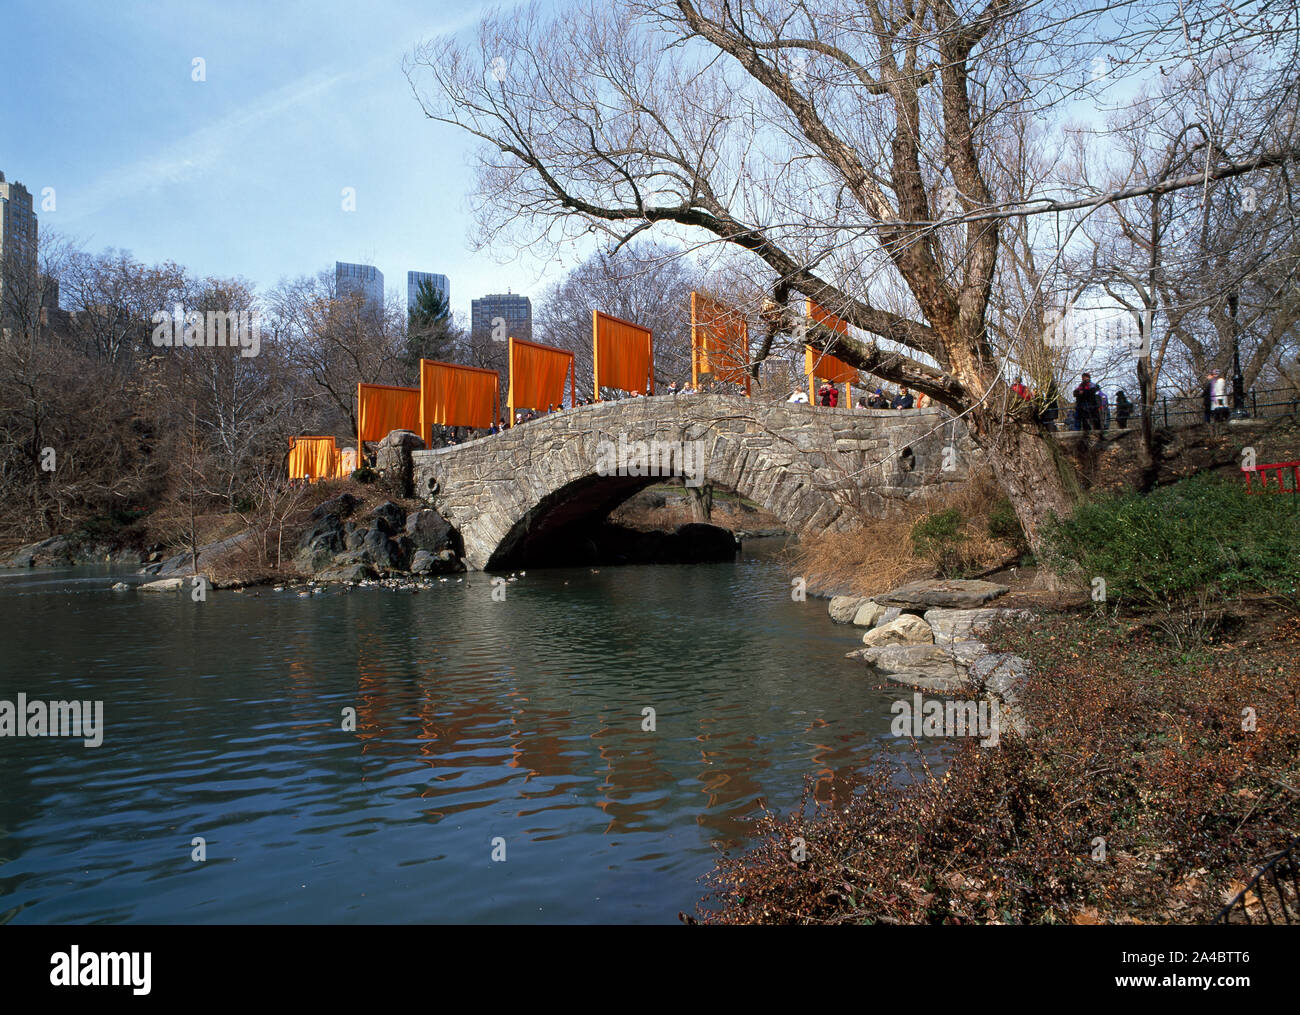 The Gates, a site-specific work of art by Christo and Jeanne-Claude in Central Park, New York City Stock Photo